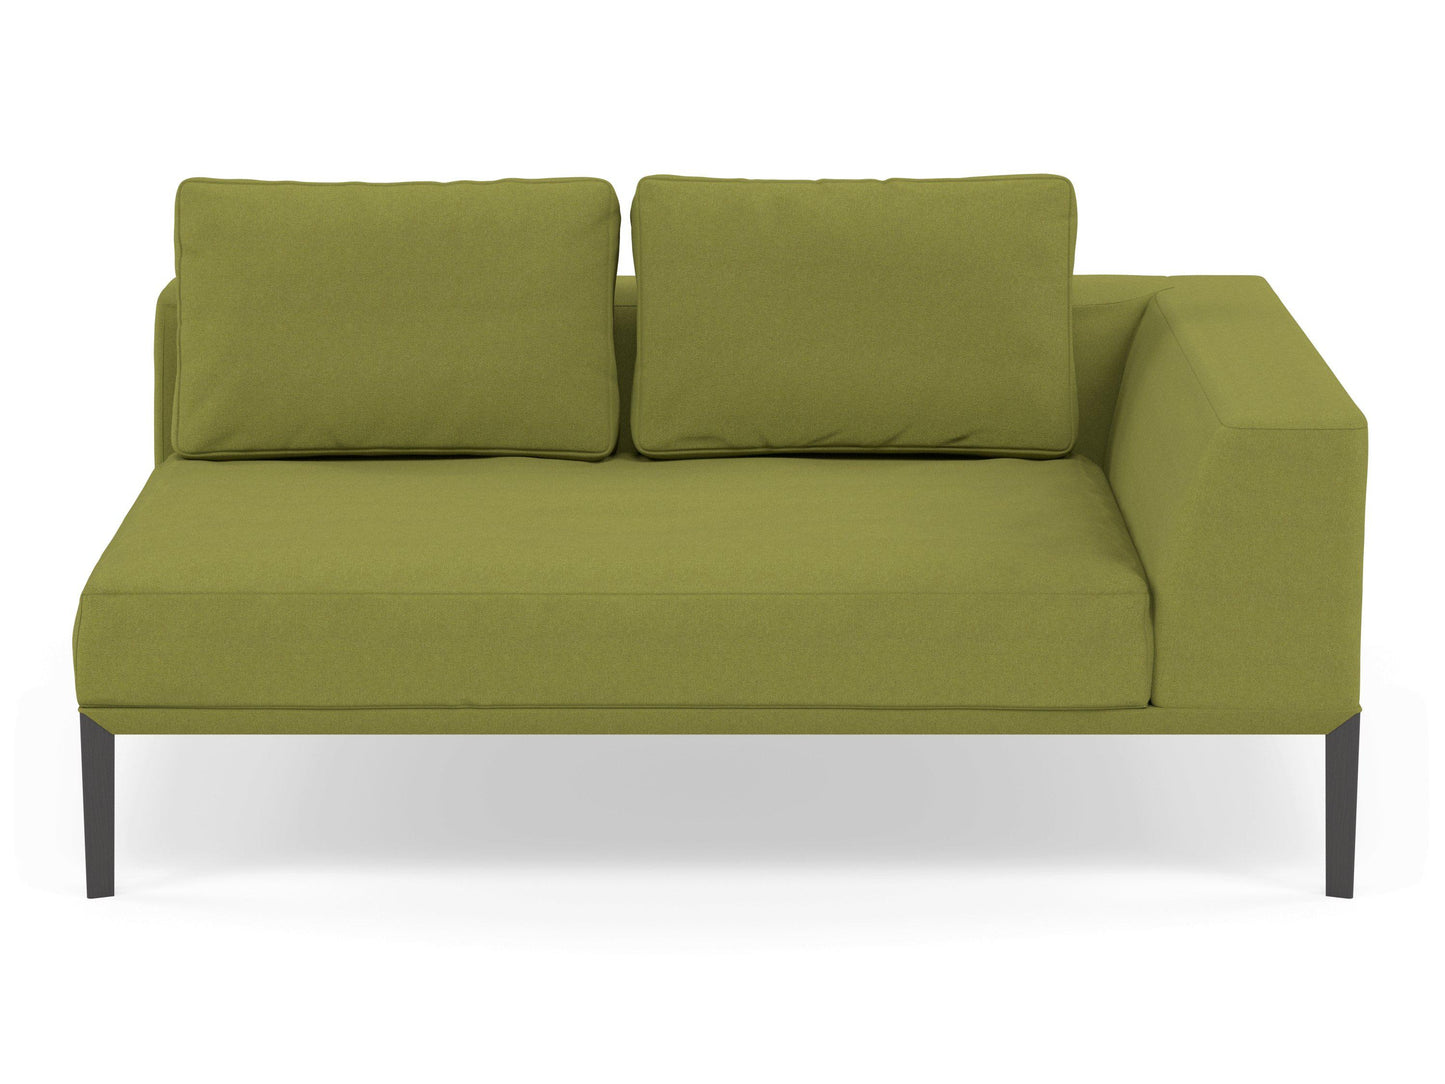 Modern 2 Seater Chaise Lounge Style Sofa with Left Armrest in Lime Green Fabric-Wenge Oak-Distinct Designs (London) Ltd